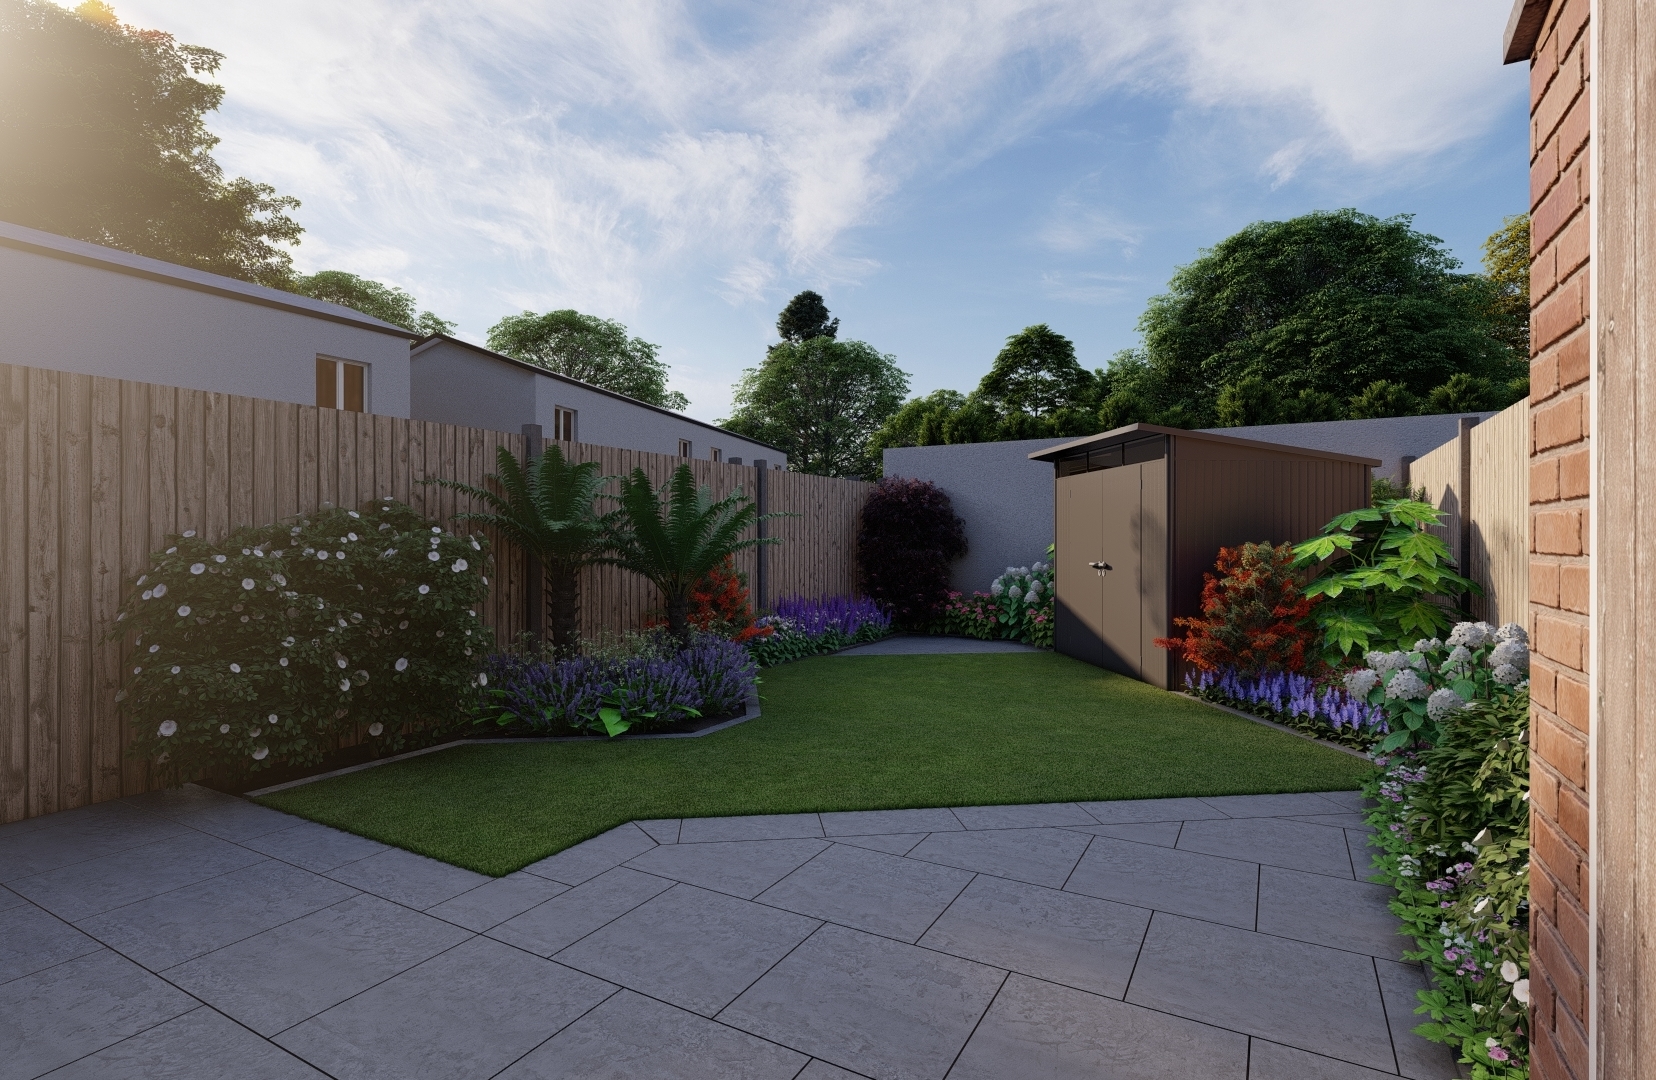 Design Visuals for a Family Garden in Dublin 12 featuring natural grass lawn, limestone paving, Biohort Garden Shed and mixed low maintenance  planting.